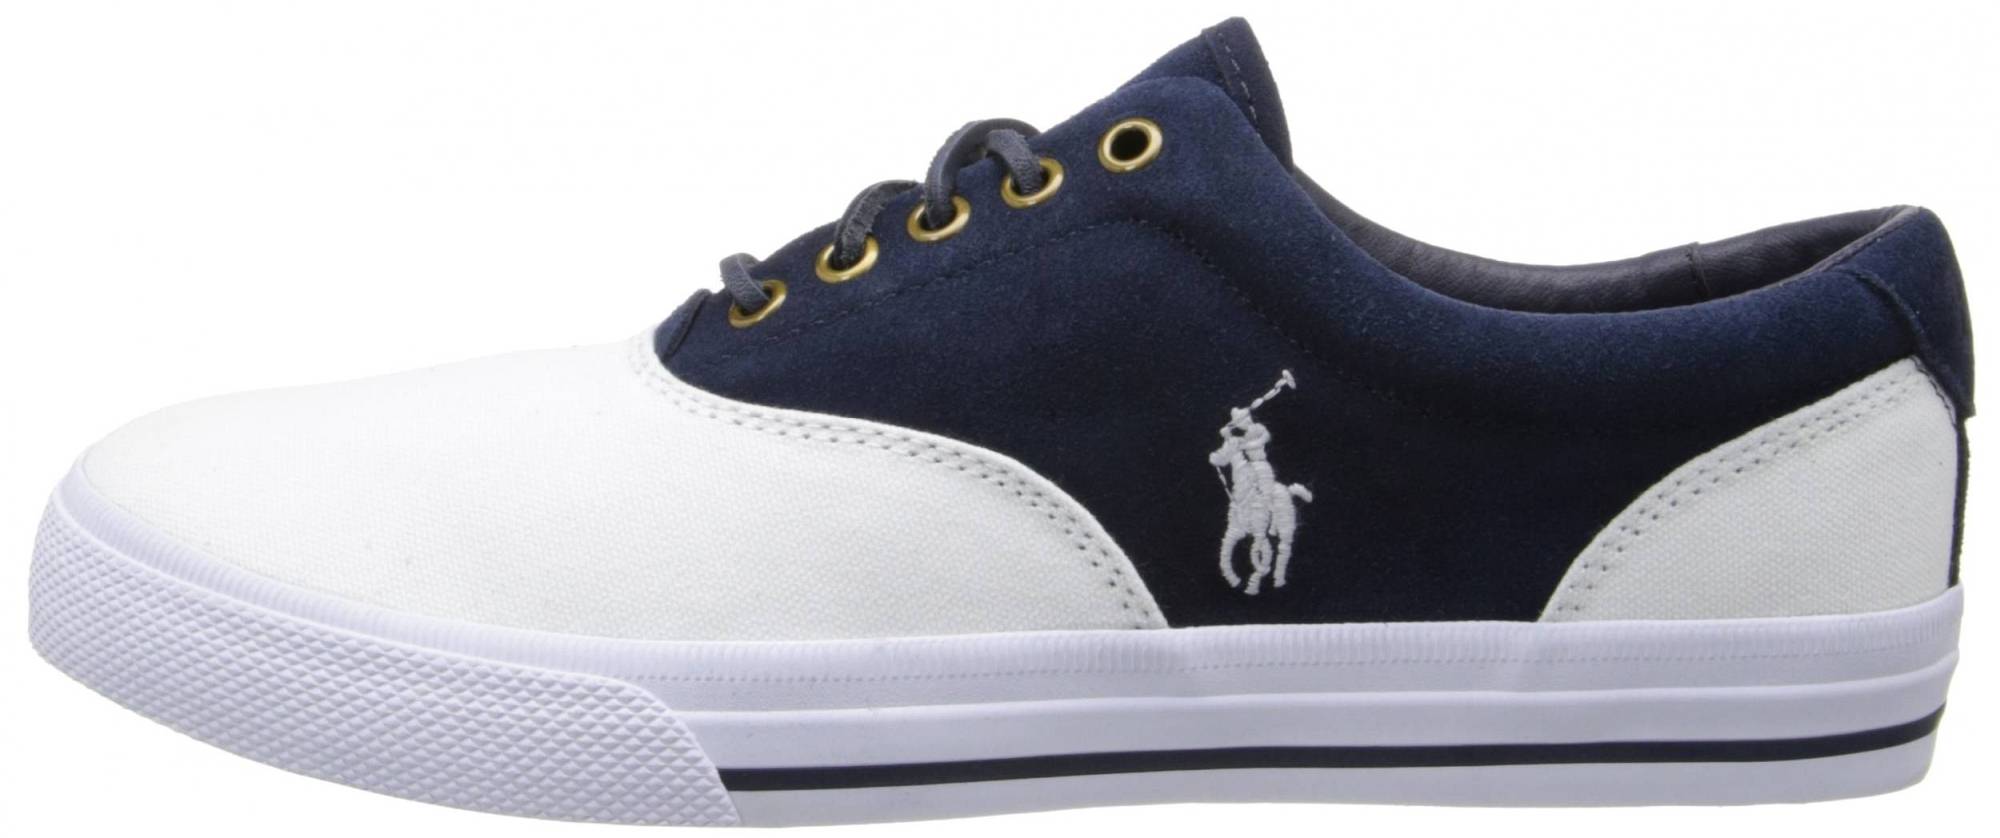 Polo Ralph Lauren Vaughn Saddle – Shoes Reviews & Reasons To Buy